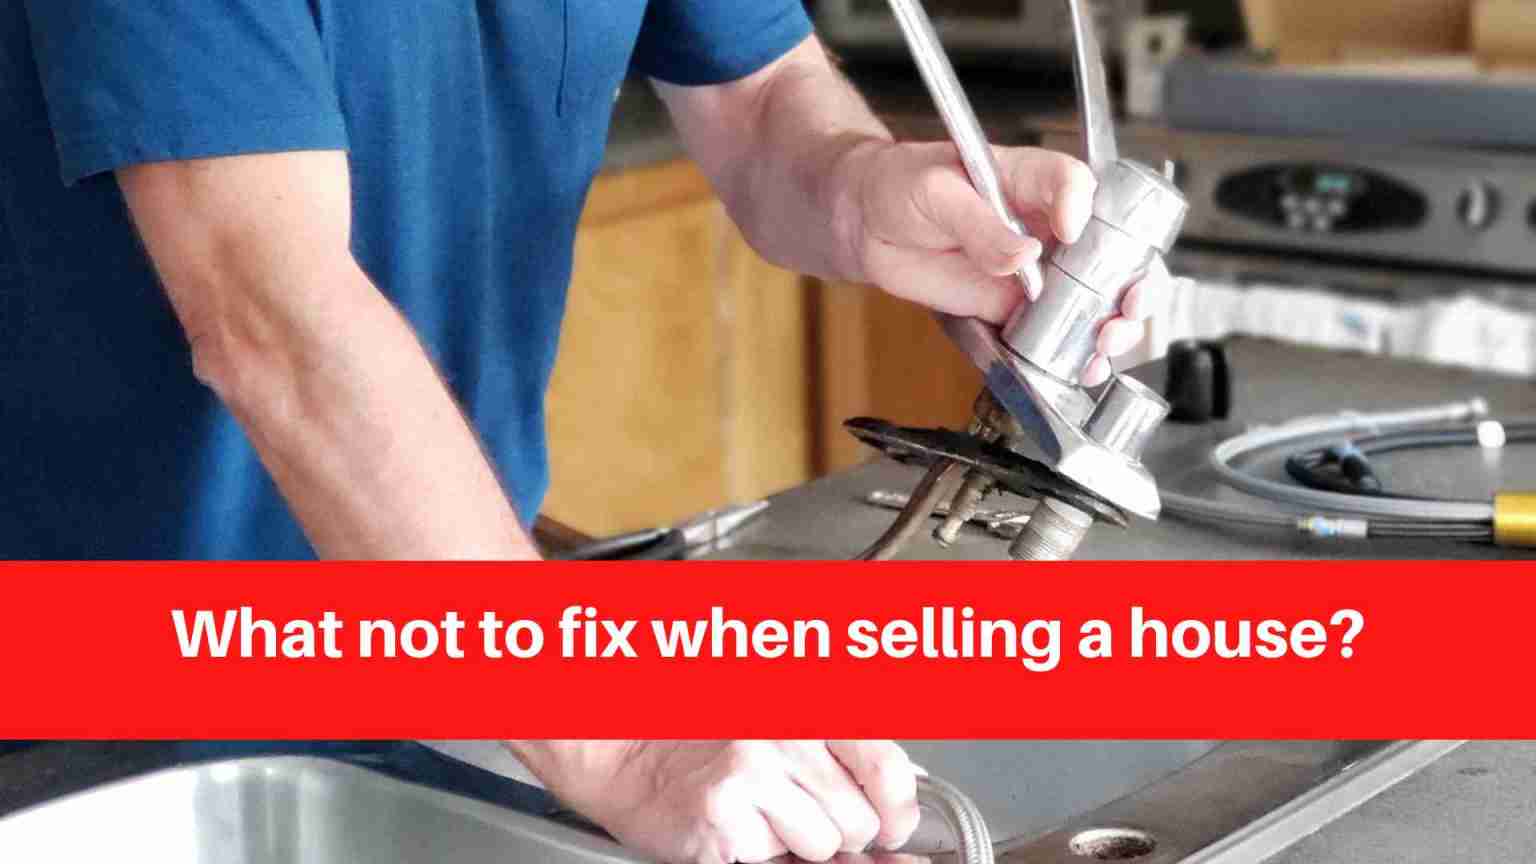 What not to fix when selling a house